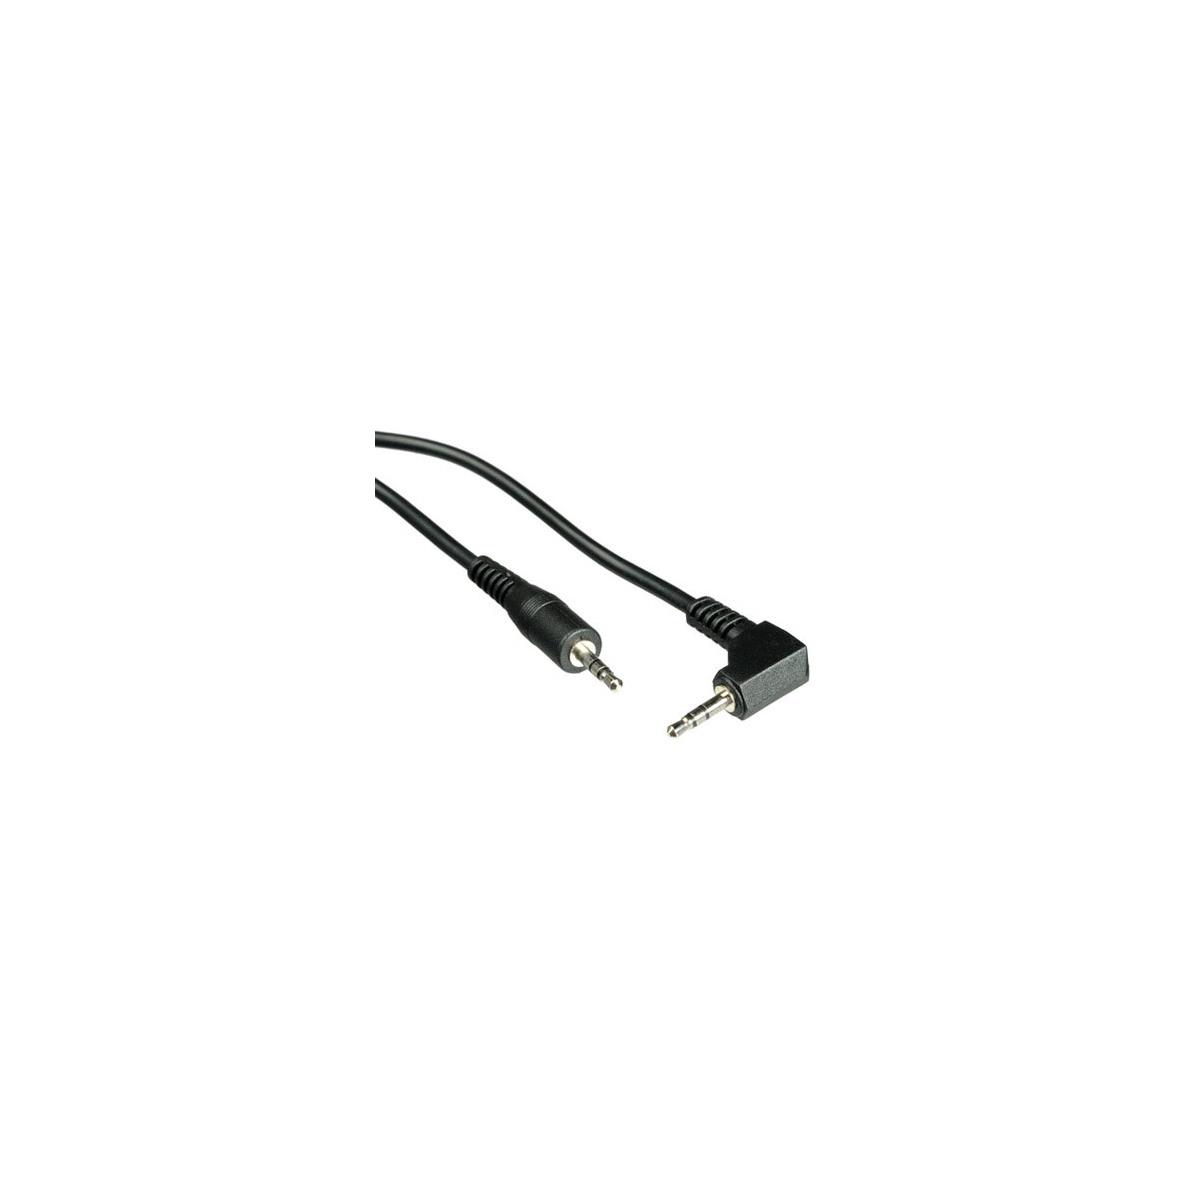 Acebil DV-40 0.4m/1.3' Cable for RMC-1DV & RMC-1DVX Zoom Controllers The Acebil DV-40 0.4m/1.3' Cable is a spare cable designed for use with RMC-1DV and RMC-1DVX zoom controllers.